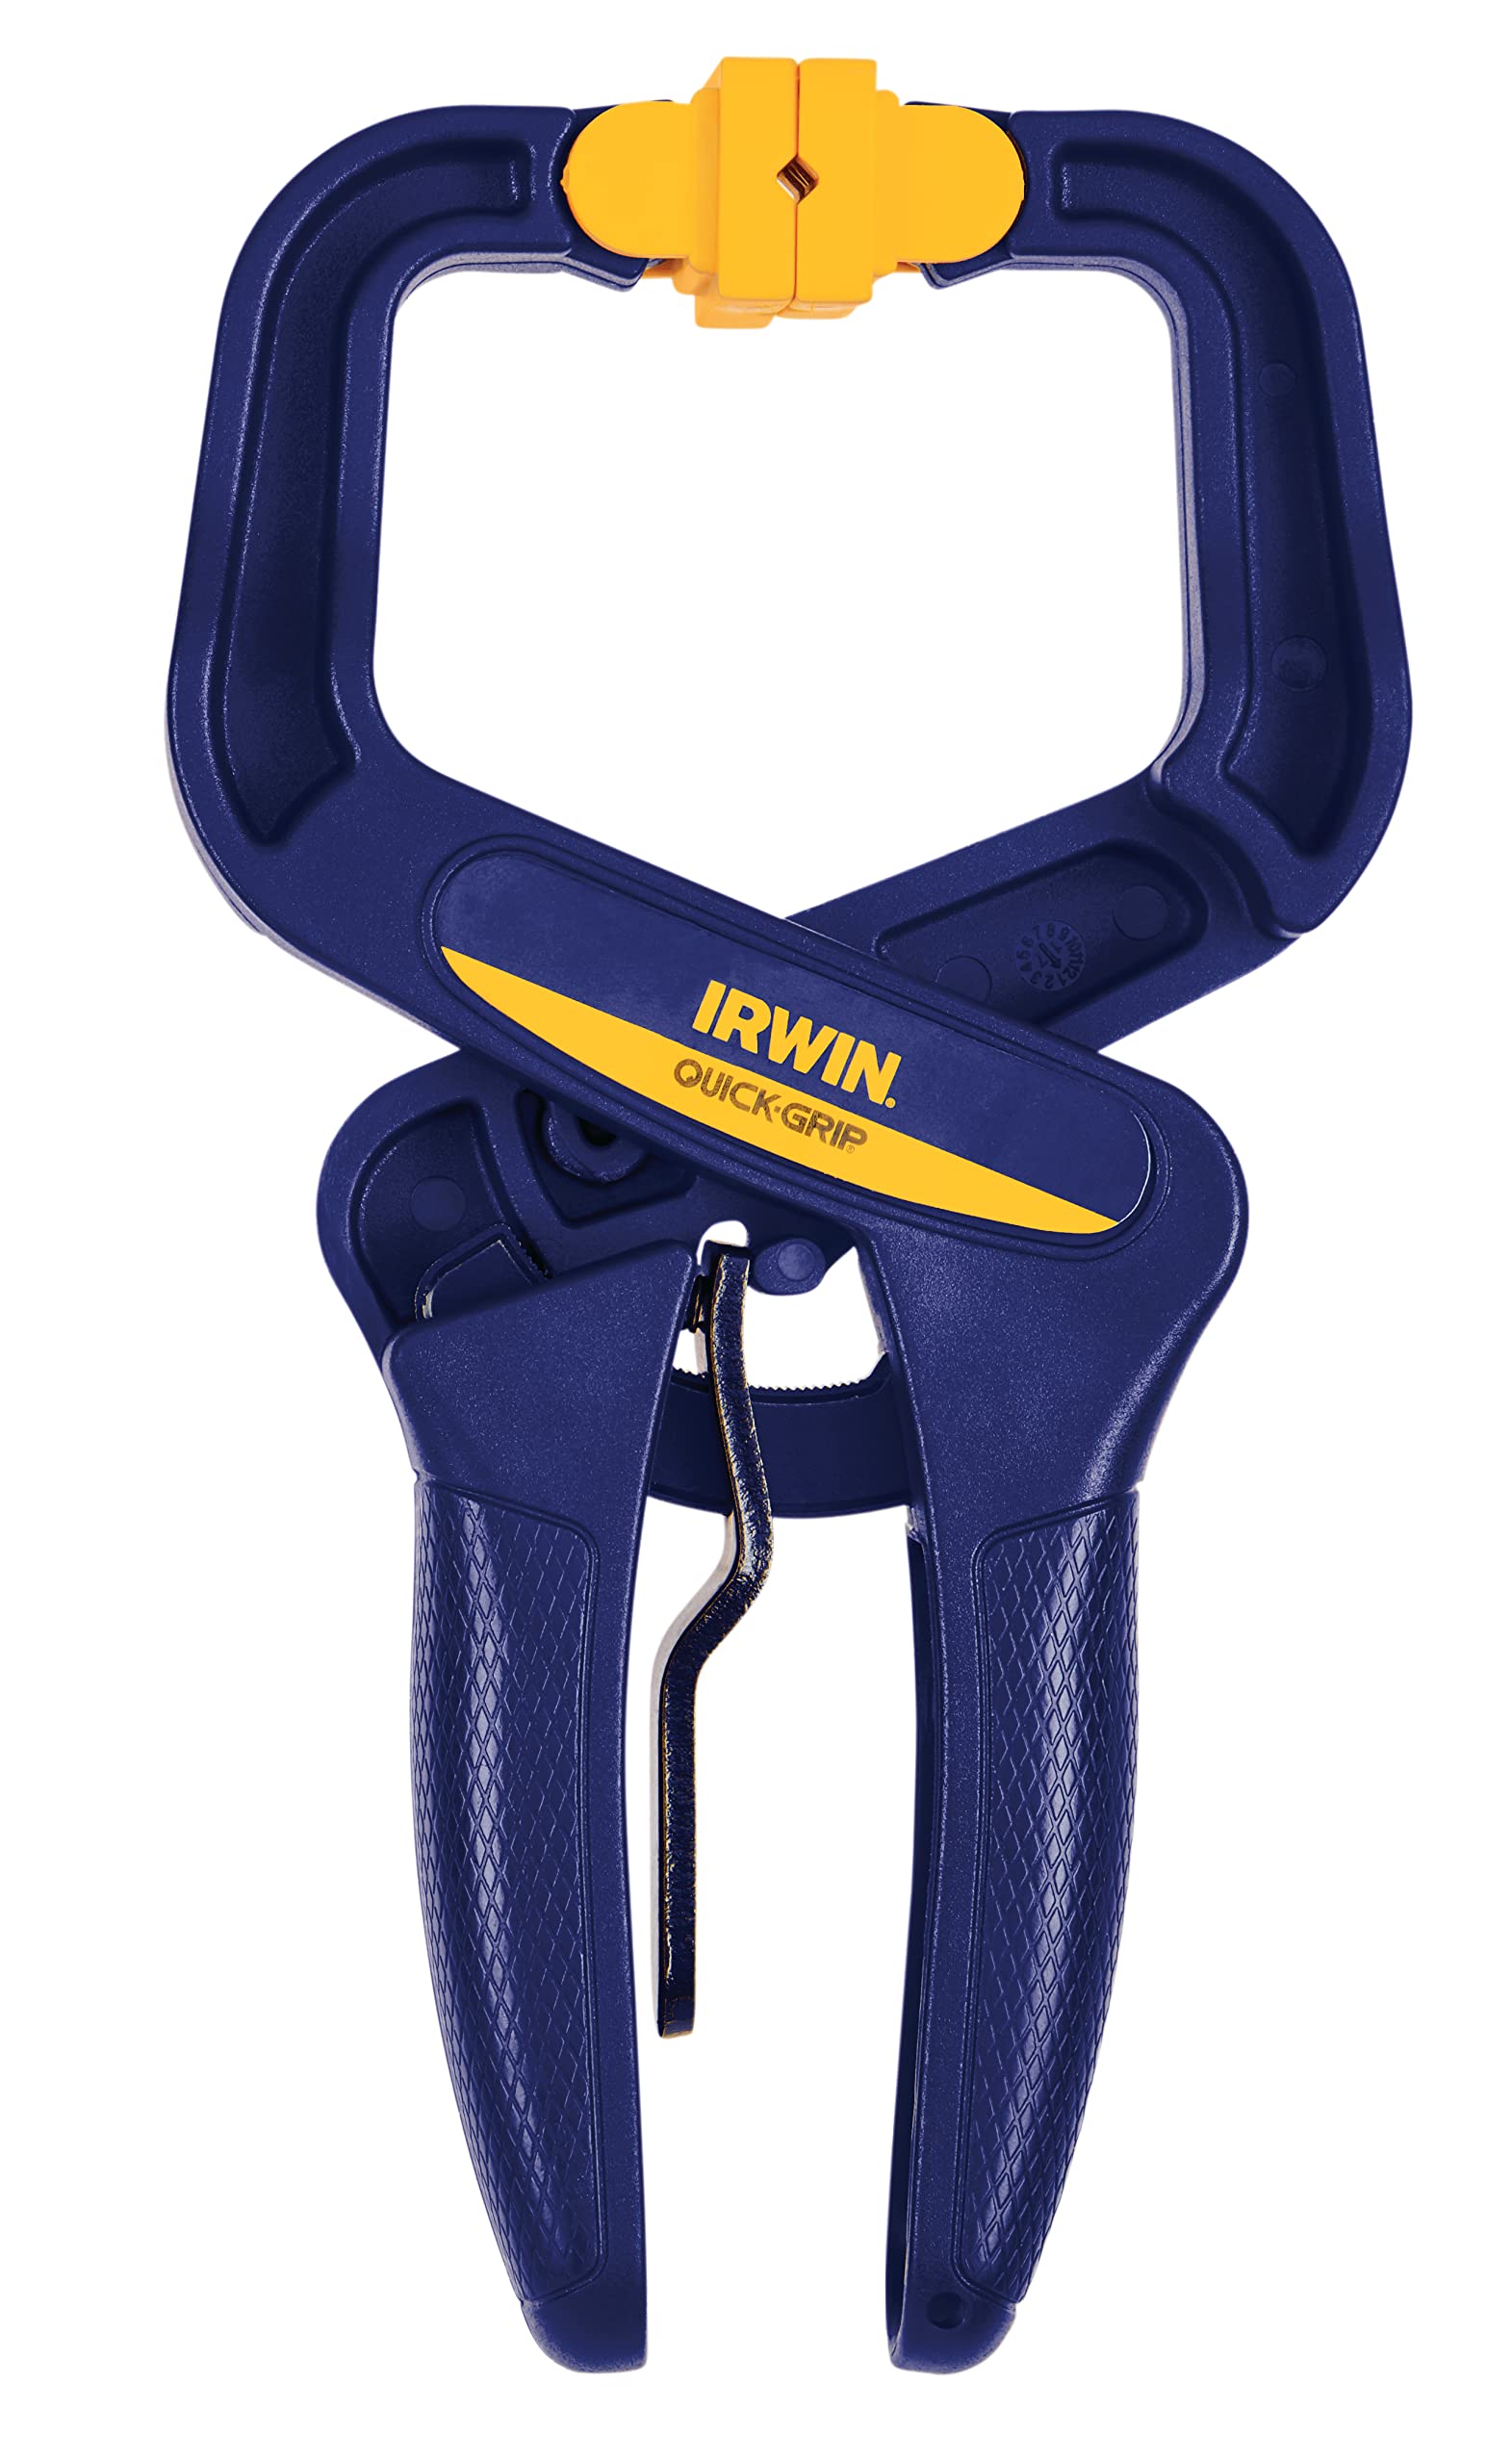 IRWIN QUICK-GRIP Clamps, 4 Piece Set with Bar Clamps, 4-1/4